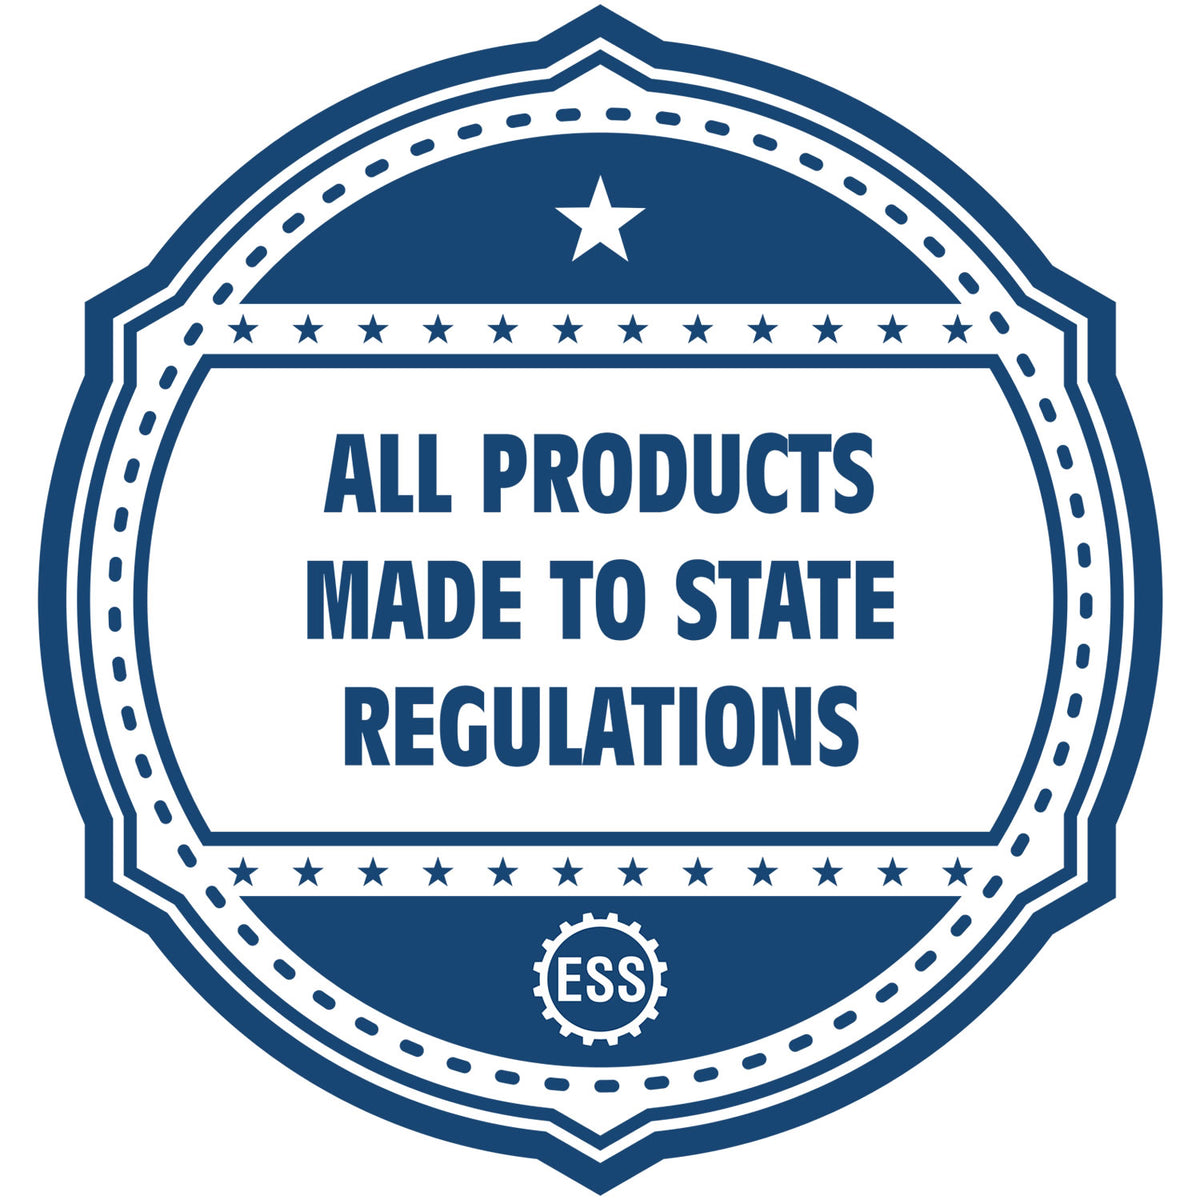 An icon or badge element for the Indiana Desk Surveyor Seal Embosser showing that this product is made in compliance with state regulations.